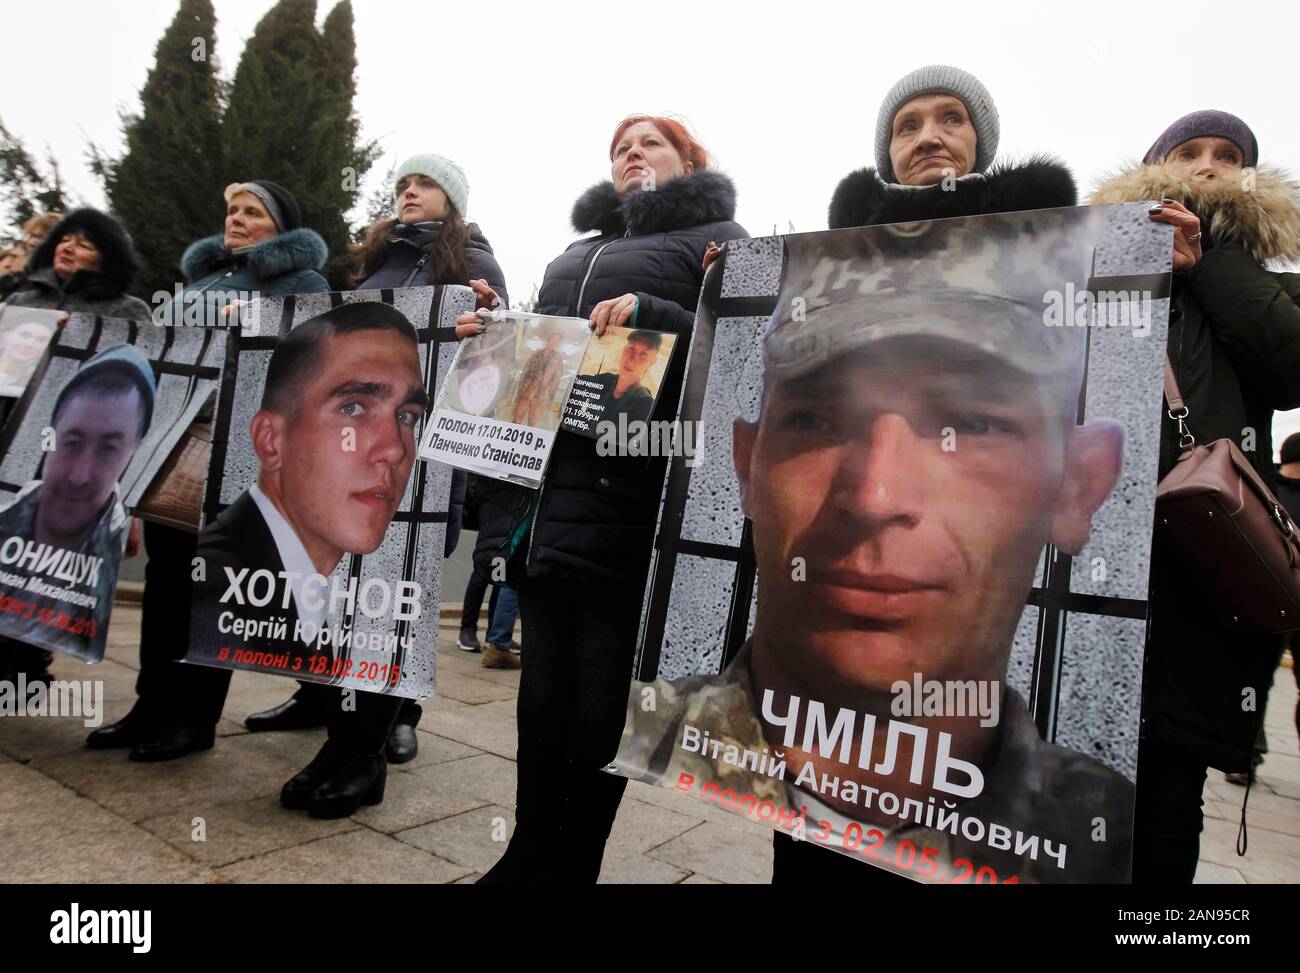 Relatives and friends hold portraits of Ukrainian civilian prisoners and prisoners of war (POW) during the rally in support of Ukrainian prisoners outside the Presidential Office in Kiev.Ukraine swaps prisoners with pro-Russian separatists in attempt to end war. According to the President of Ukraine official site, during phone talk the President of Ukraine Volodymyr Zelensky and President of Russia Vladimir Putin agreed to proceed with the approval of new lists for the release of Ukrainians, including Crimeans from Crimea and Russia, and Russians held in Ukraine. Stock Photo